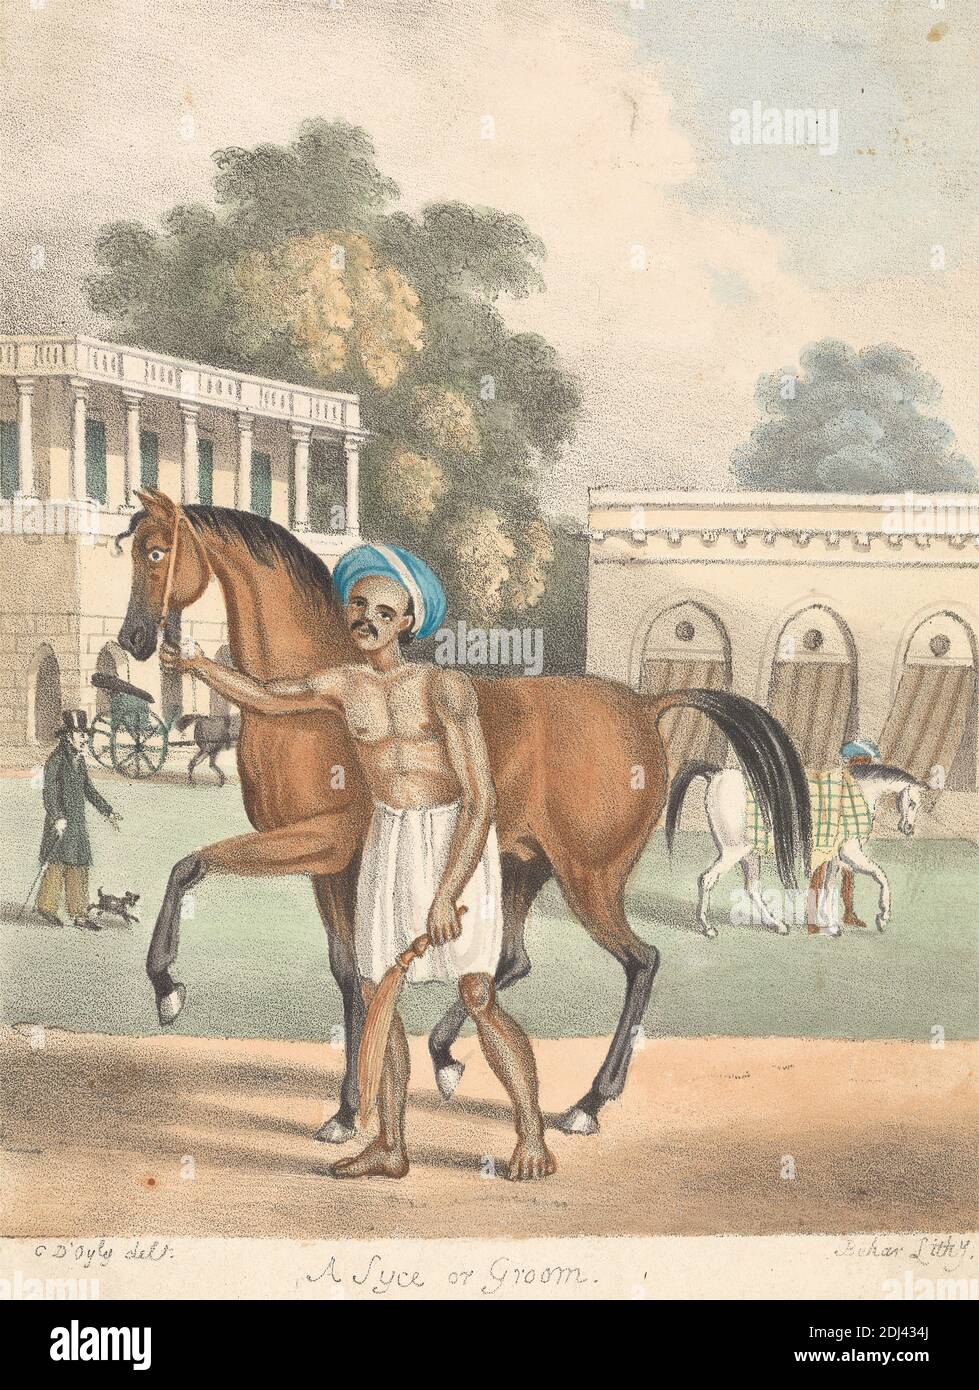 A Syce or Groom, Sir Charles D'Oyly, 1781–1845, British, active in India, Printed by The Behar Amateur Lithographic Press, 1781–1845, British, active in India, undated, Chromolithograph on medium, slightly textured, cream wove paper mounted on moderately thick, slightly textured, beige wove paper, Mount: 9 7/8 x 6 1/16 inches (25.1 x 15.4 cm), Sheet: 7 x 5 1/4 inches (17.8 x 13.4 cm), and Image: 6 9/16 x 5 1/4 inches (16.7 x 13.4 cm), animal art, arches, architectural subject, buildings, cane, columns, dog (animal), genre subject, grass, grooms, horses (animals), Indian, nobleman, path Stock Photo